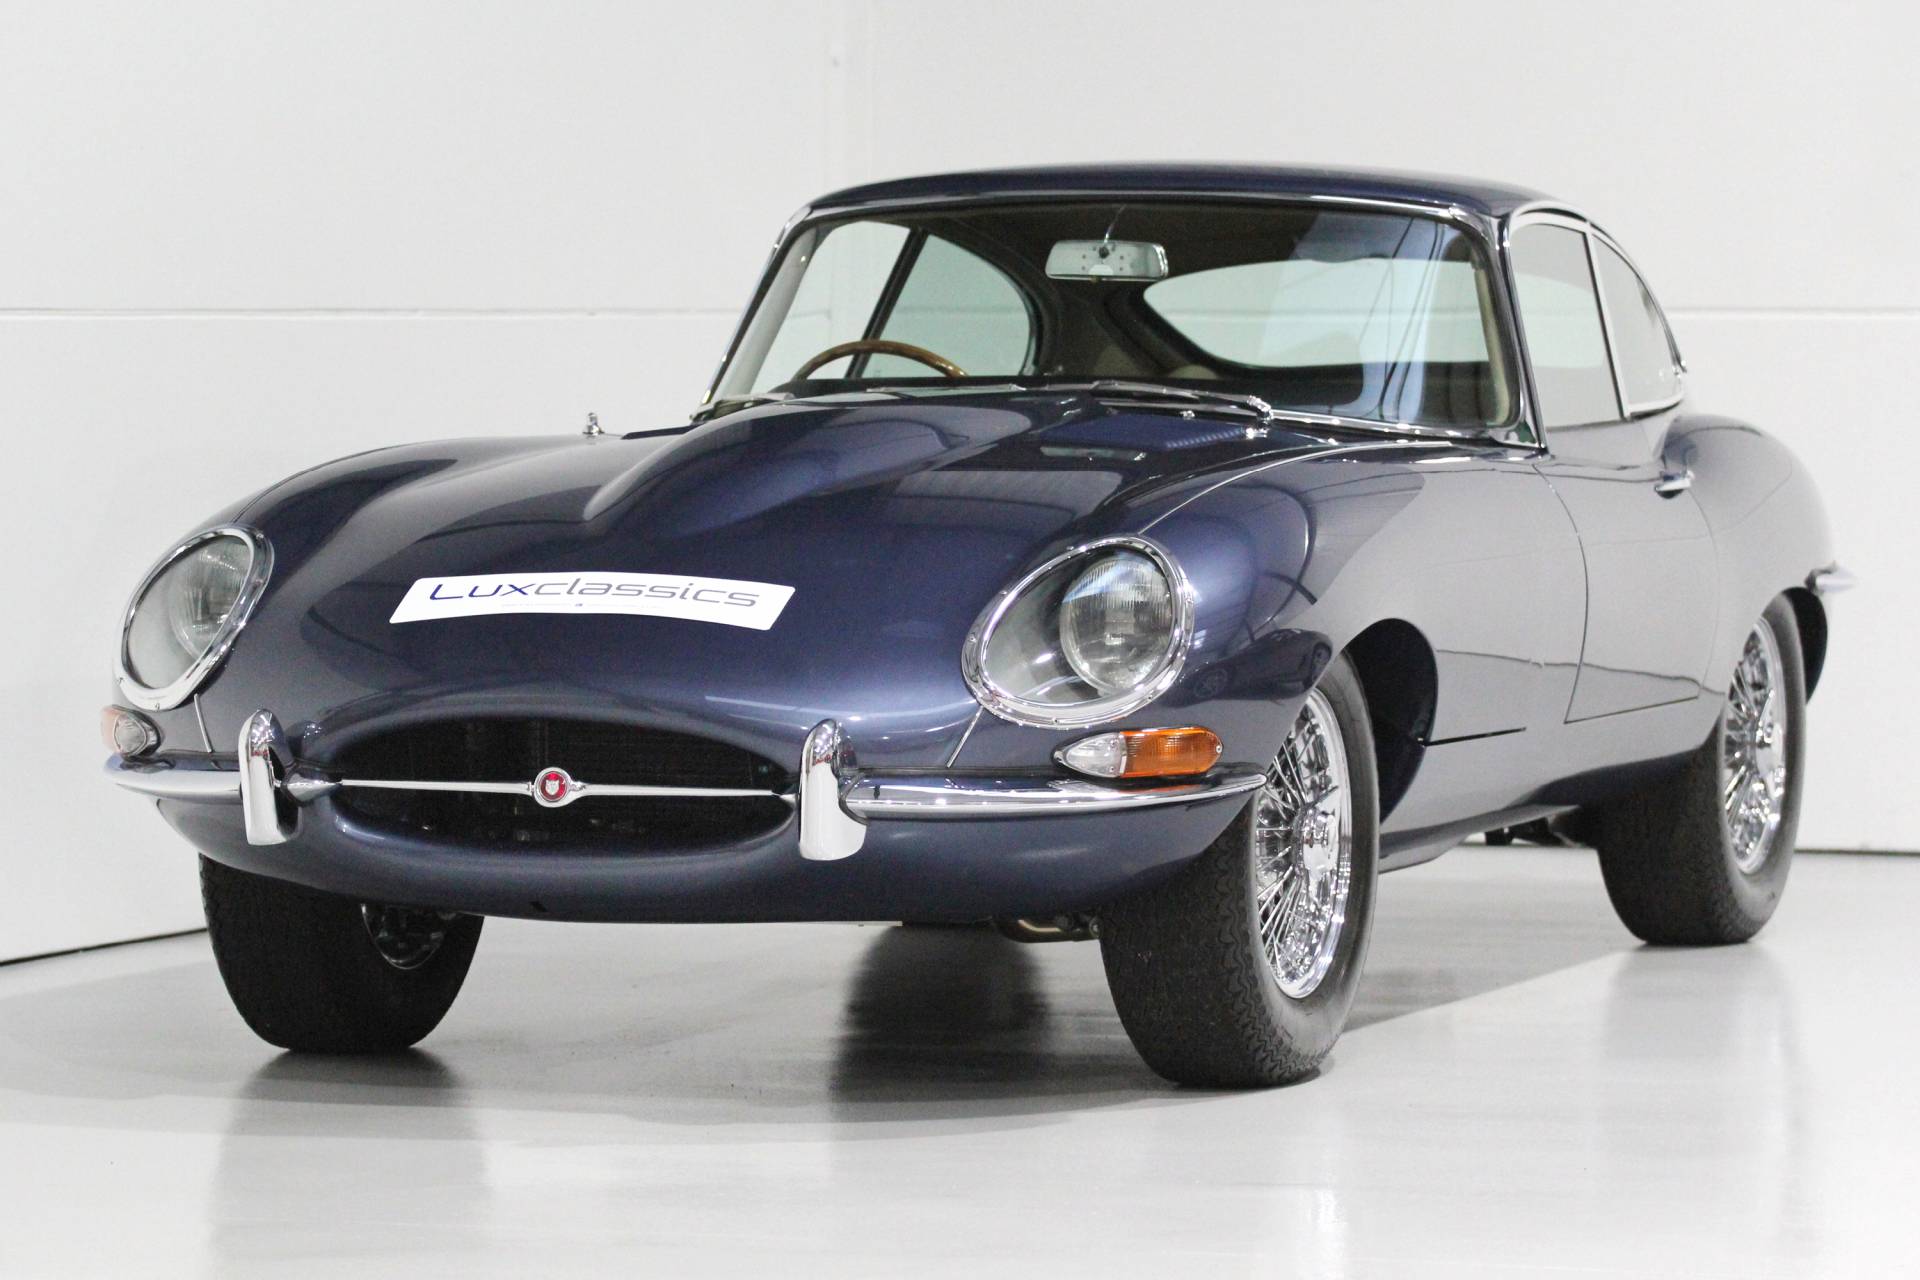 For Sale Jaguar  E  Type  4  2  1966 offered for GBP 195 000